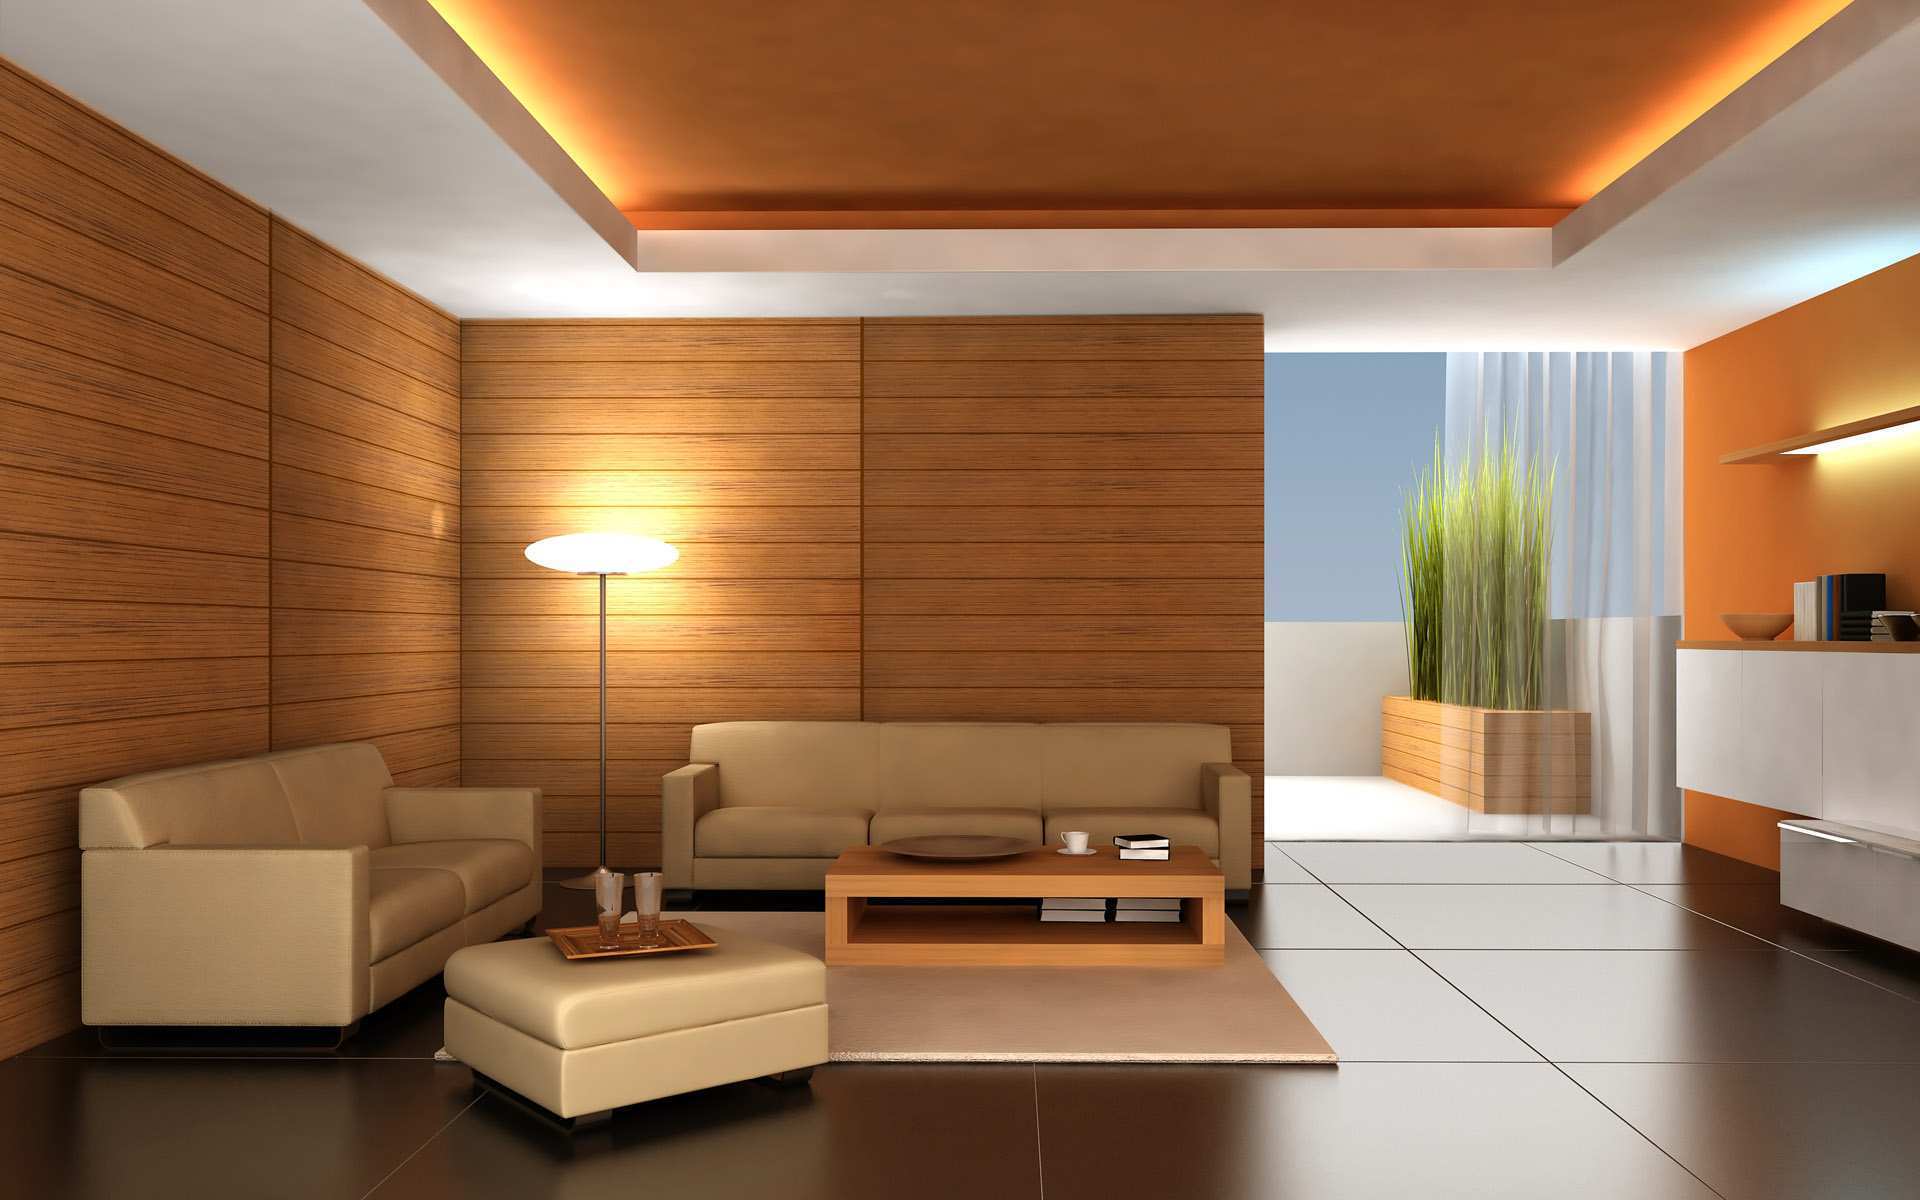 Beautiful-Living-Room-Decoration-with-Beige-Sof-and-Wooden-Wall-Design